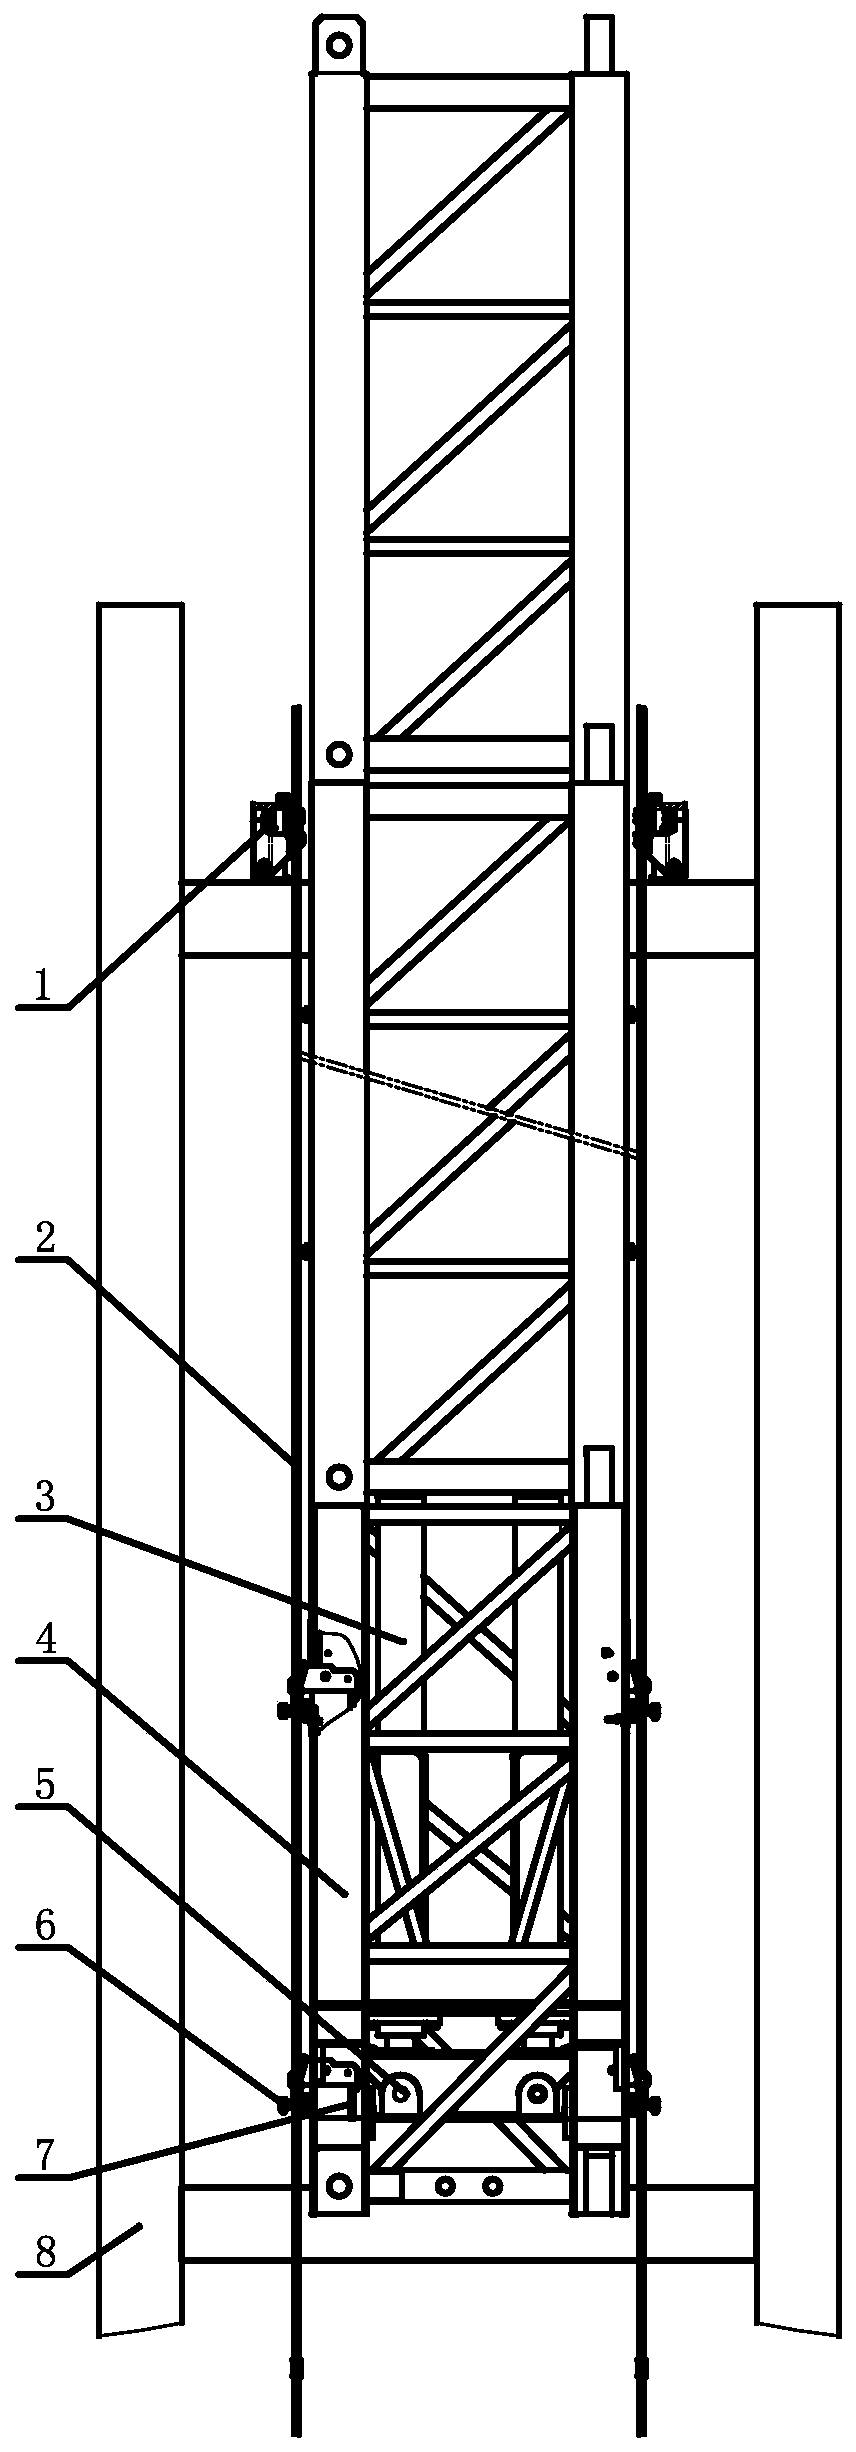 Climbing belt type climbing safety facility for tower crane